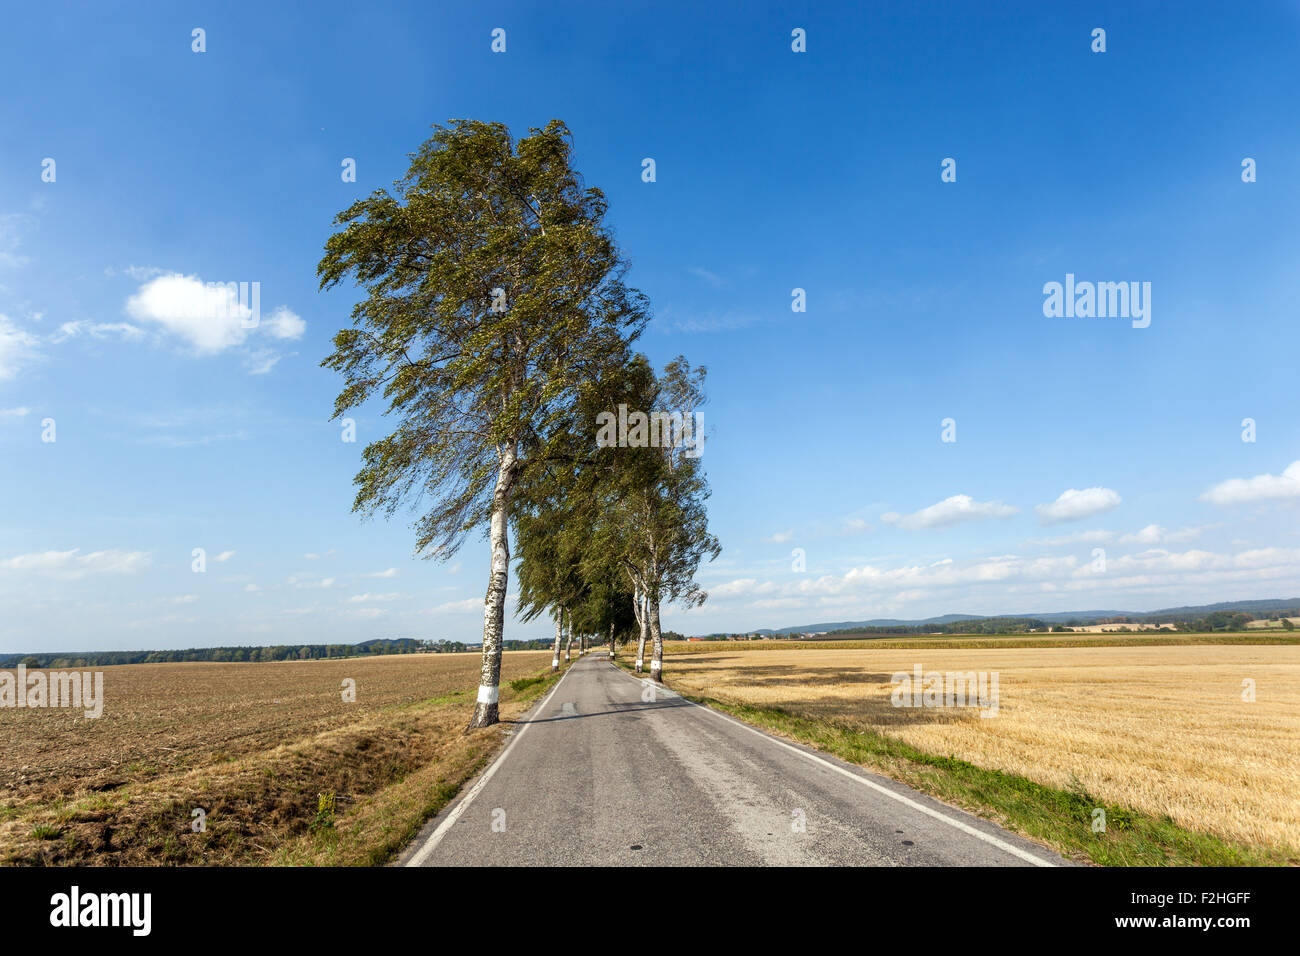 Country road in the landscape of South Bohemia, Old Silver Birch trees Betula Pendula Czech Republic, Europe Stock Photo